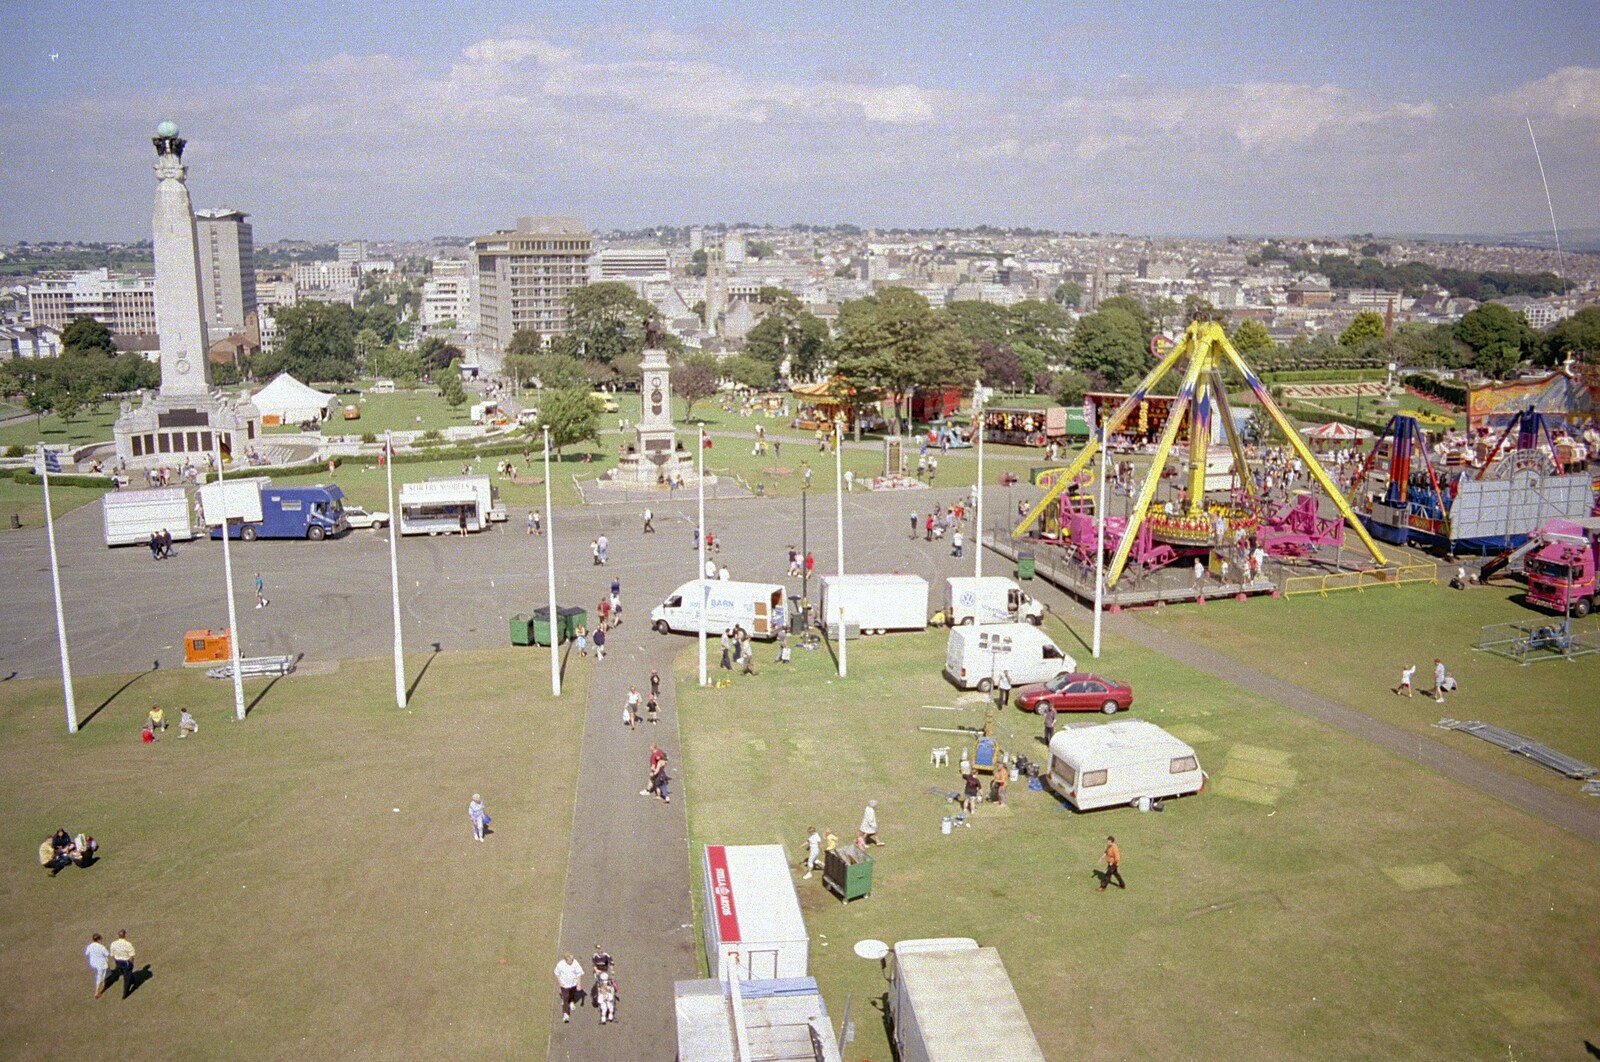 There's fairground stuff on Plymouth Hoe from A Total Eclipse of the Sun, Hoo Meavy, Devon - 11th August 1999